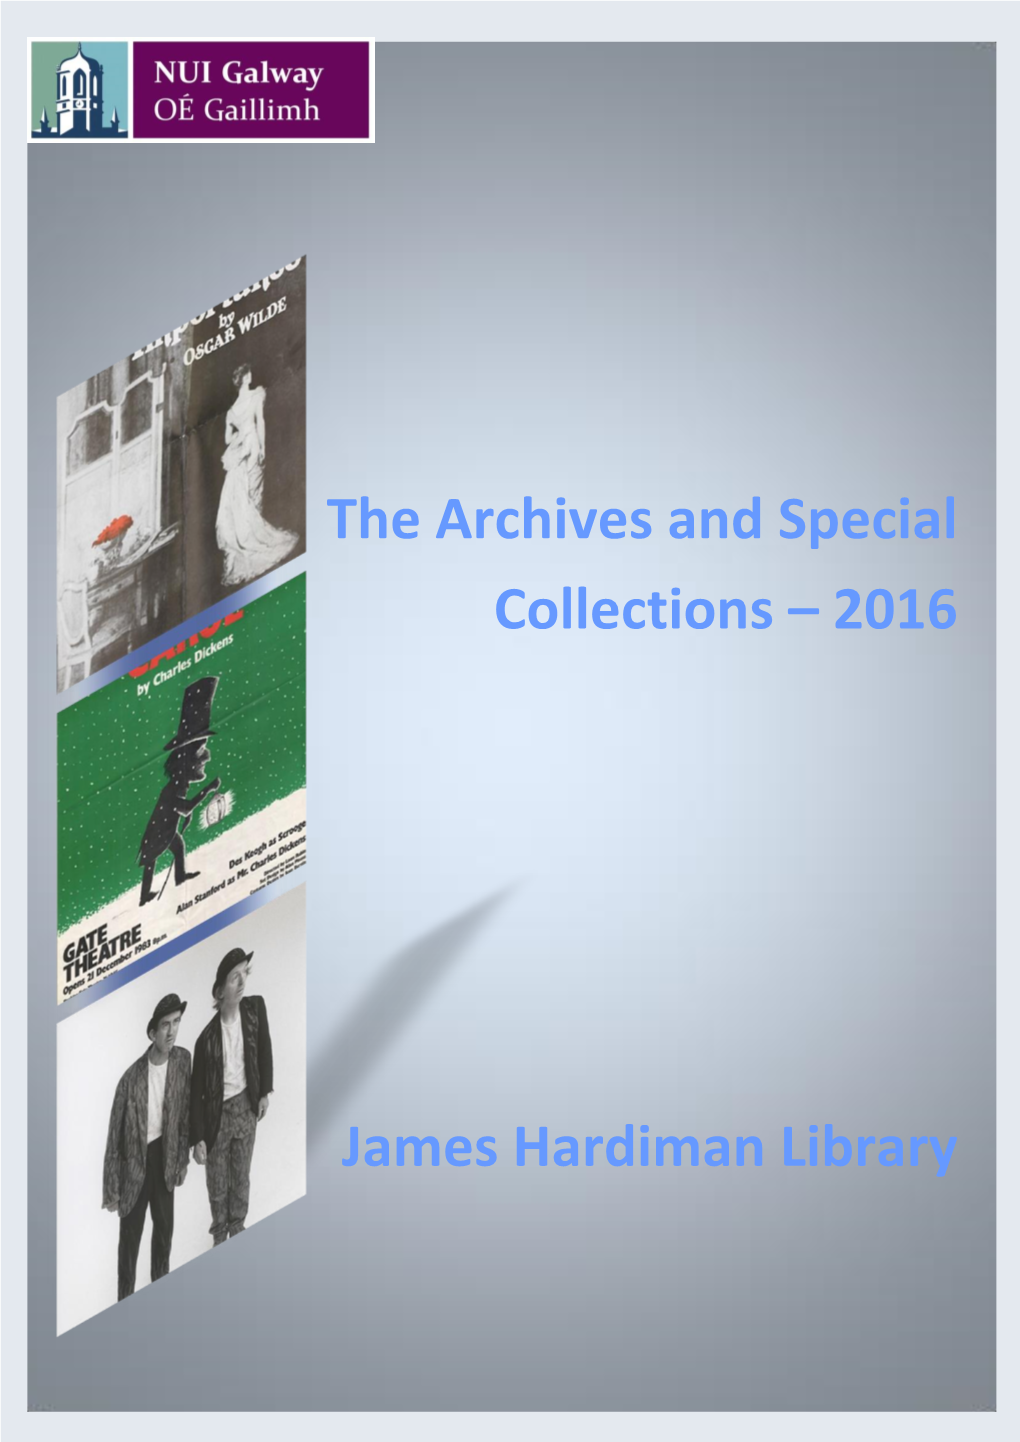 E Archives in 2015